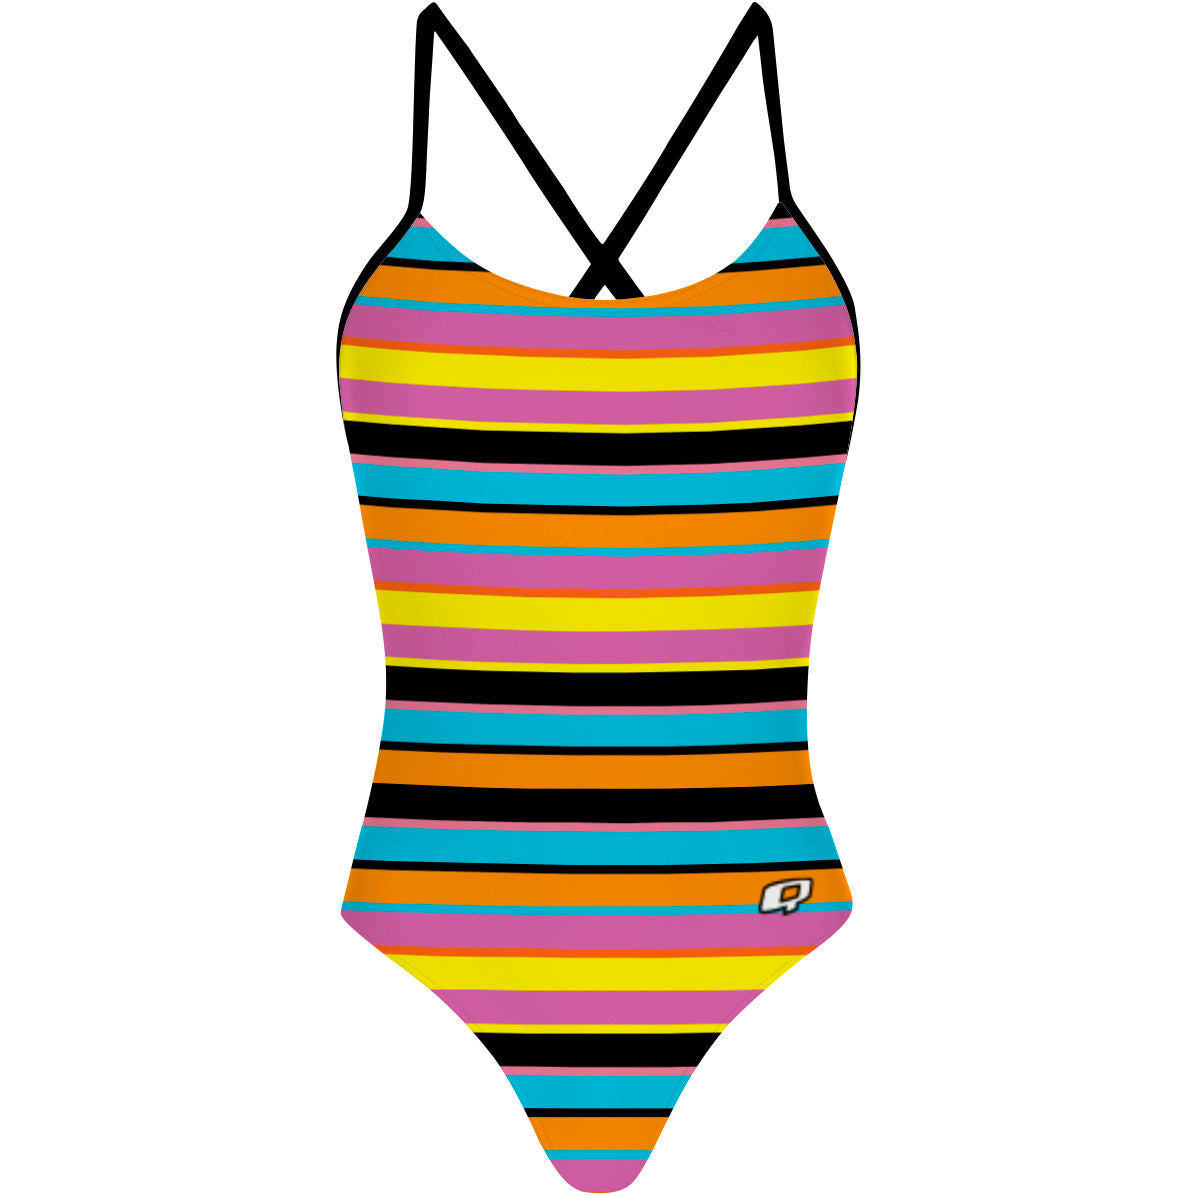 Dive Into Summer - Tieback One Piece Swimsuit